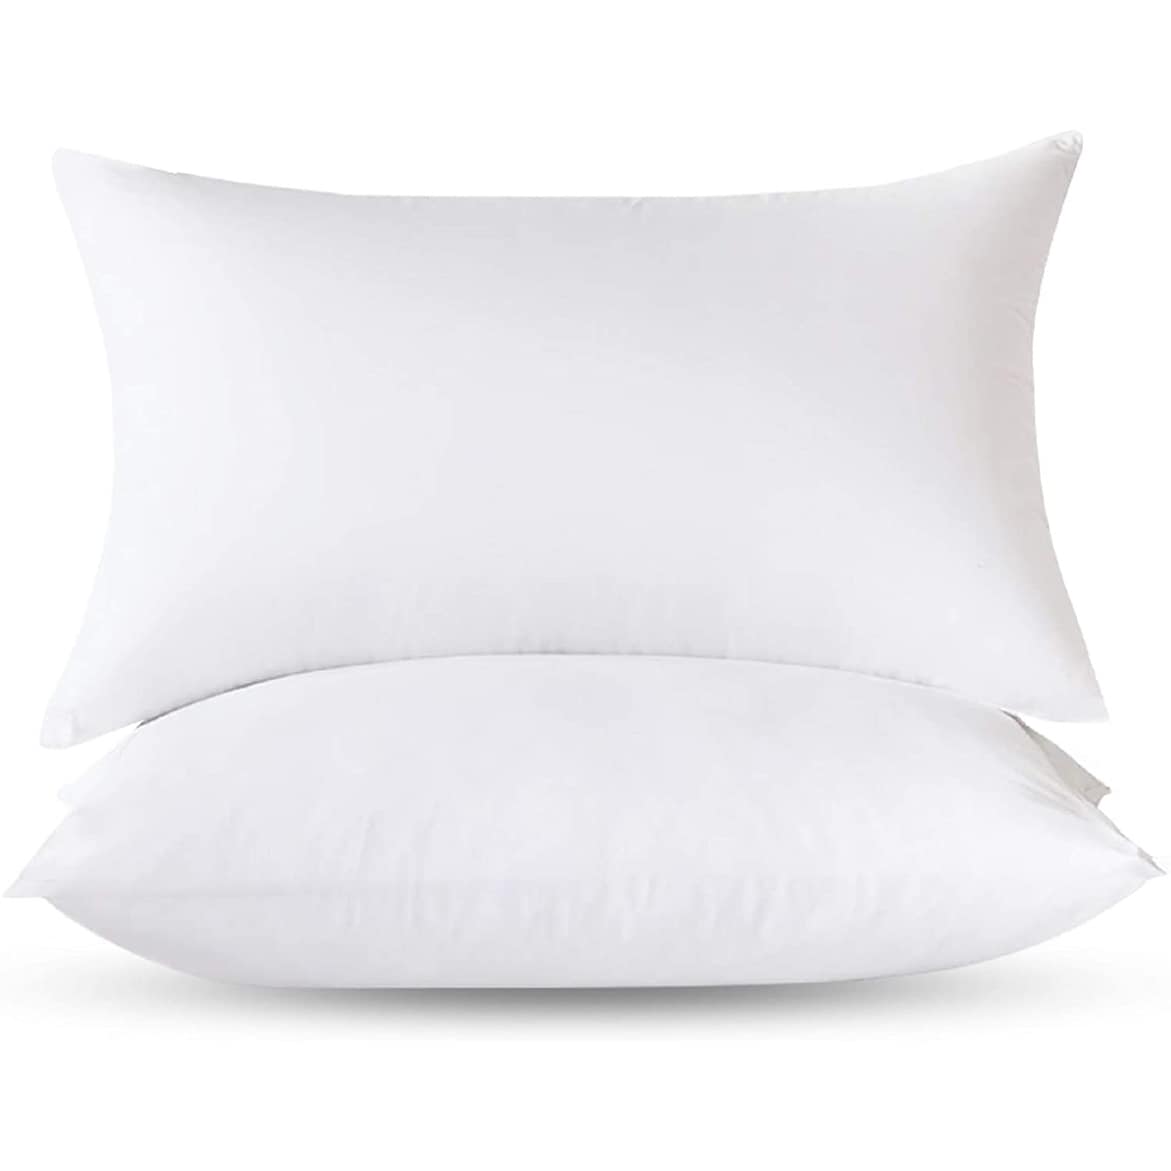 https://ak1.ostkcdn.com/images/products/is/images/direct/072ef007c9bdb5e739c53e8bd01b4485246caf3f/Empyrean-Bedding-Throw-Pillow-Insert---Cotton-Blend-Outer-Shell-Decorative-Pillows-%28Pack-of-2%29.jpg